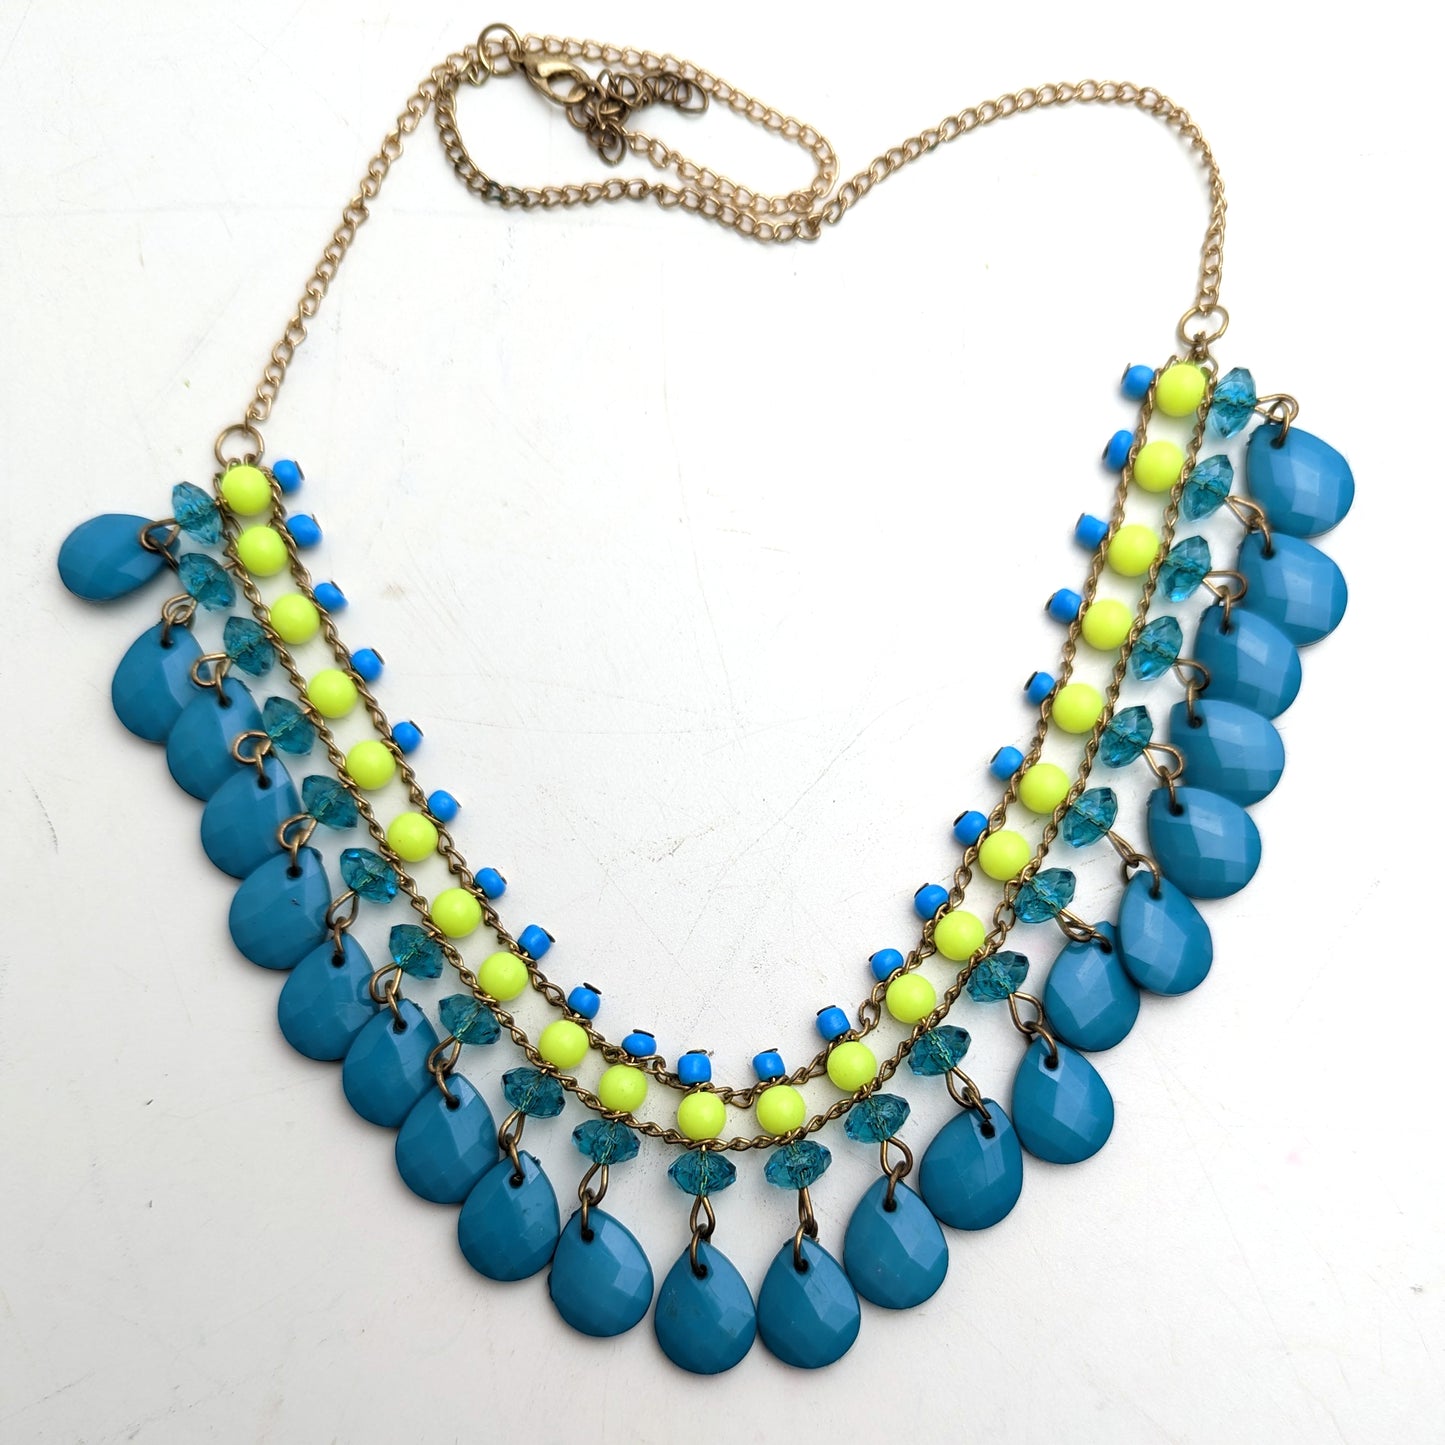 Vintage Blue and Green Beaded Teardrop Necklace Gold Color Chain